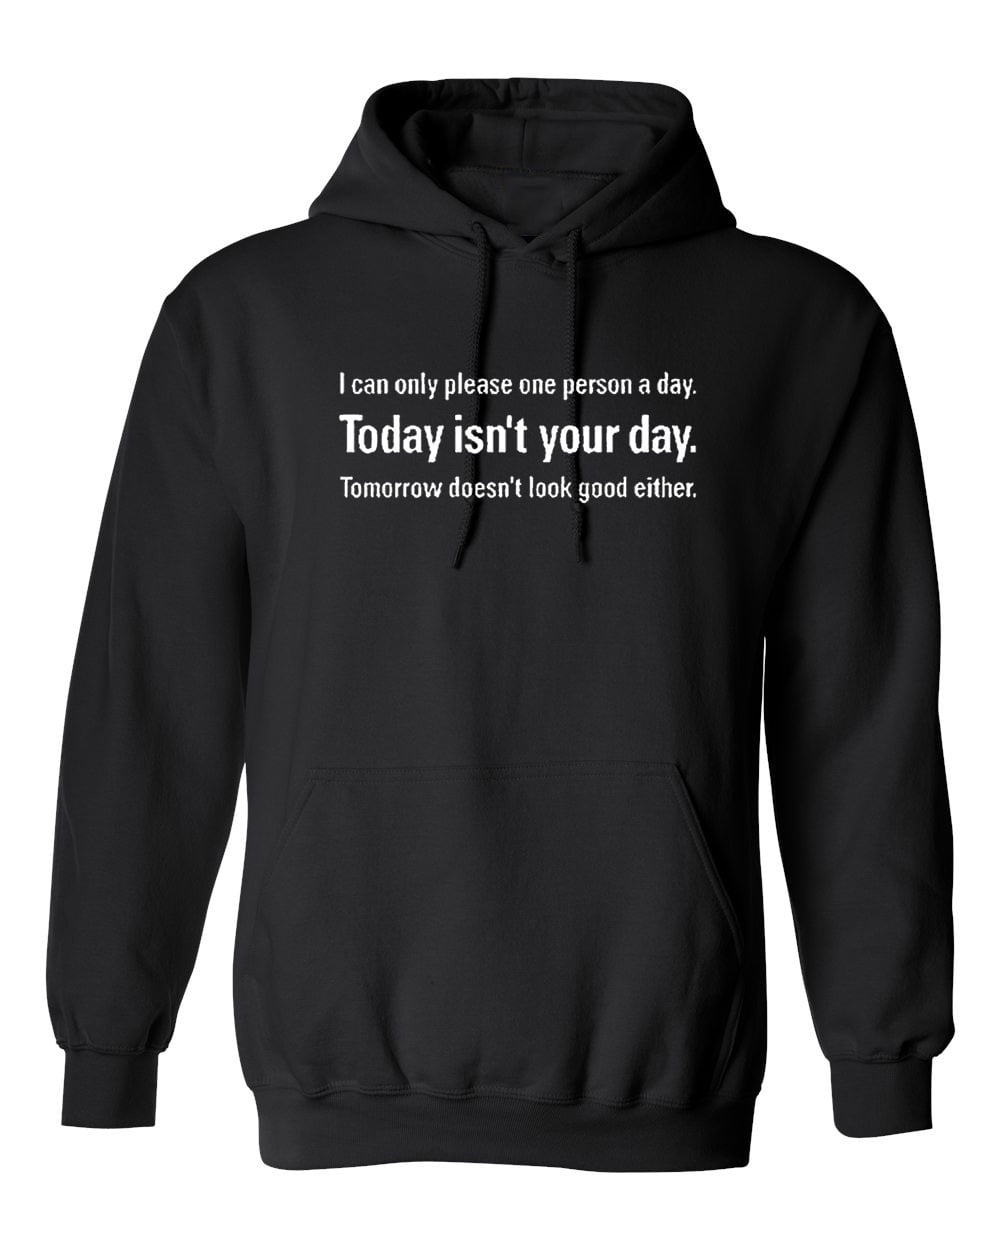 I Can Only Please One Person a Day Today Isnt Your Day Funny Hoodies for Men 